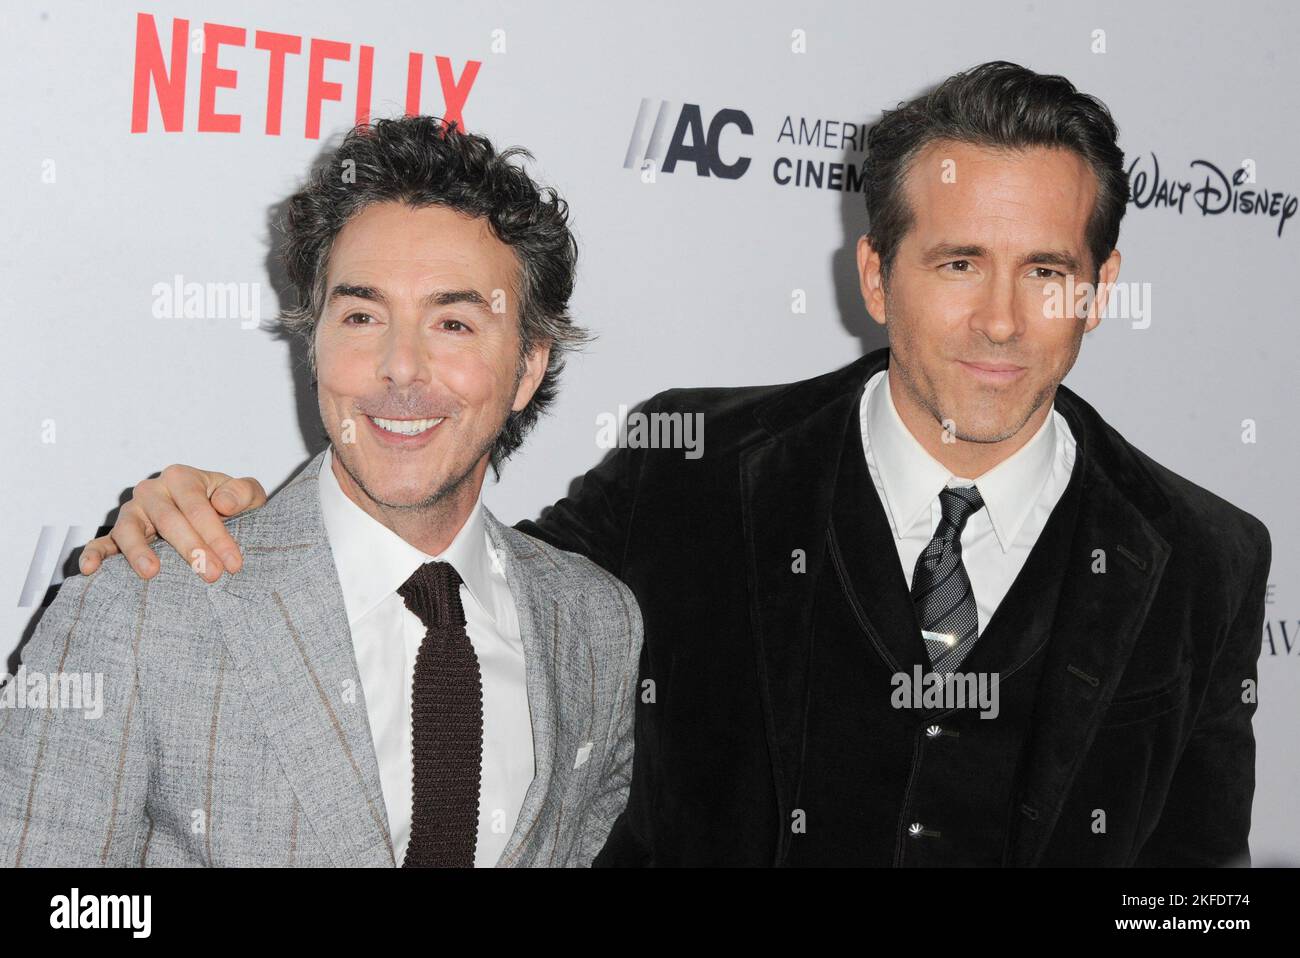 Los Angeles, CA. 17th Nov, 2022. Shawn Levy, Ryan Reynolds at arrivals for 36th Annual American Cinematheque Awards, Beverly Hilton Hotel, Los Angeles, CA November 17, 2022. Credit: Elizabeth Goodenough/Everett Collection/Alamy Live News Stock Photo